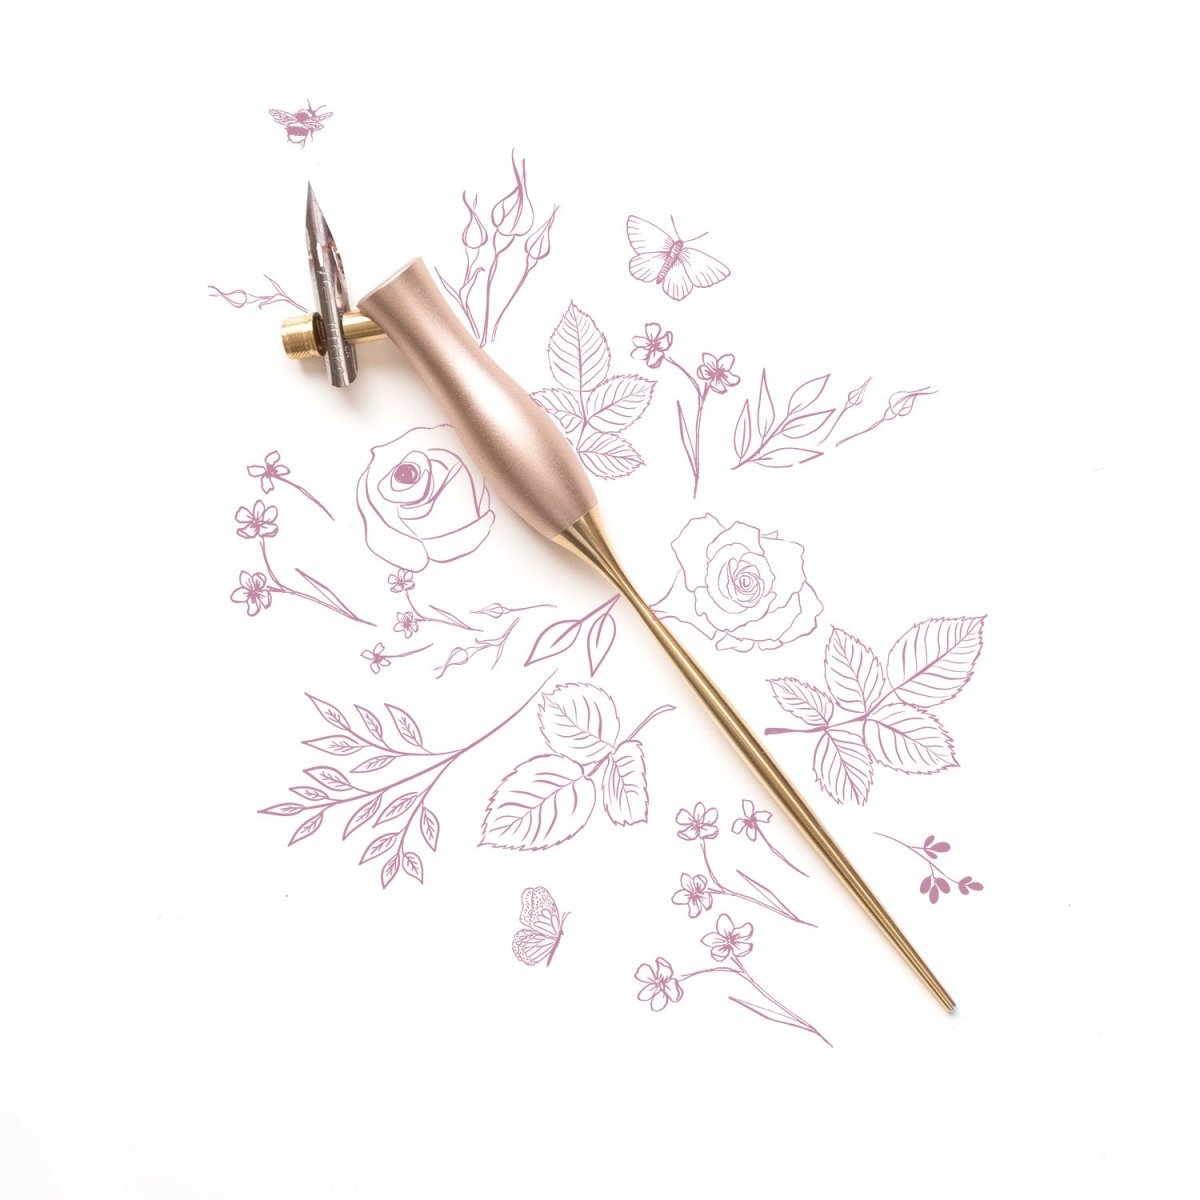 The bloom calligraphy pen with offset nib installed on a decorative background